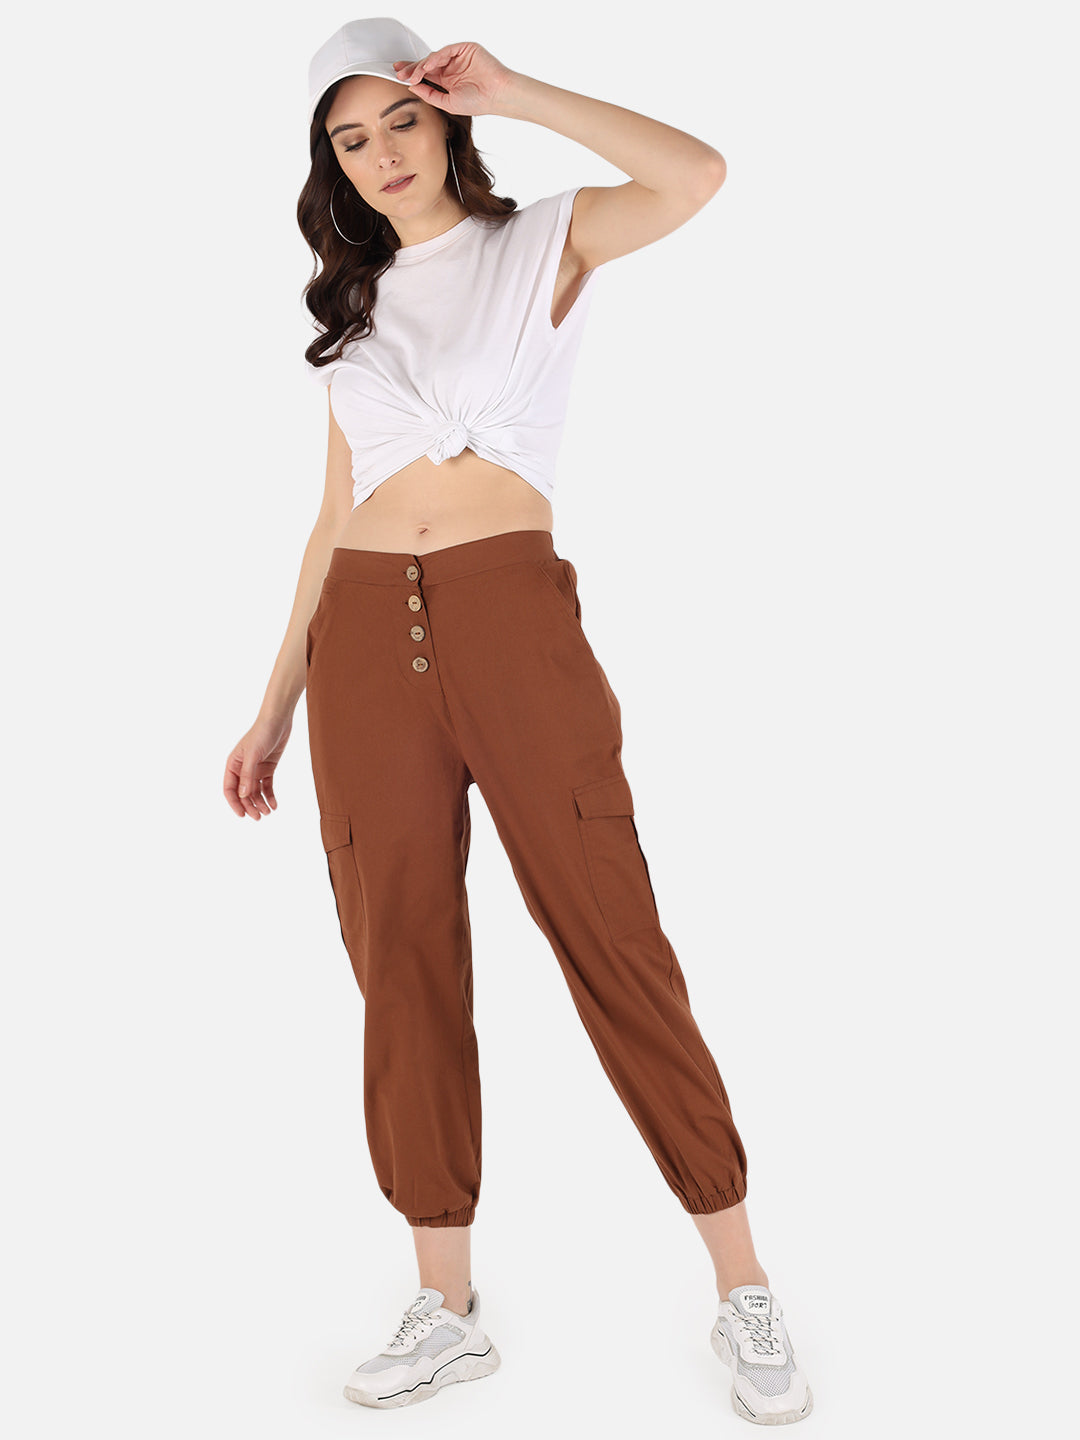 Stylish Modern Cotton Women's Cargo Pant, Hot & Trendy Pants for her, Camel  Color, Dark Brown